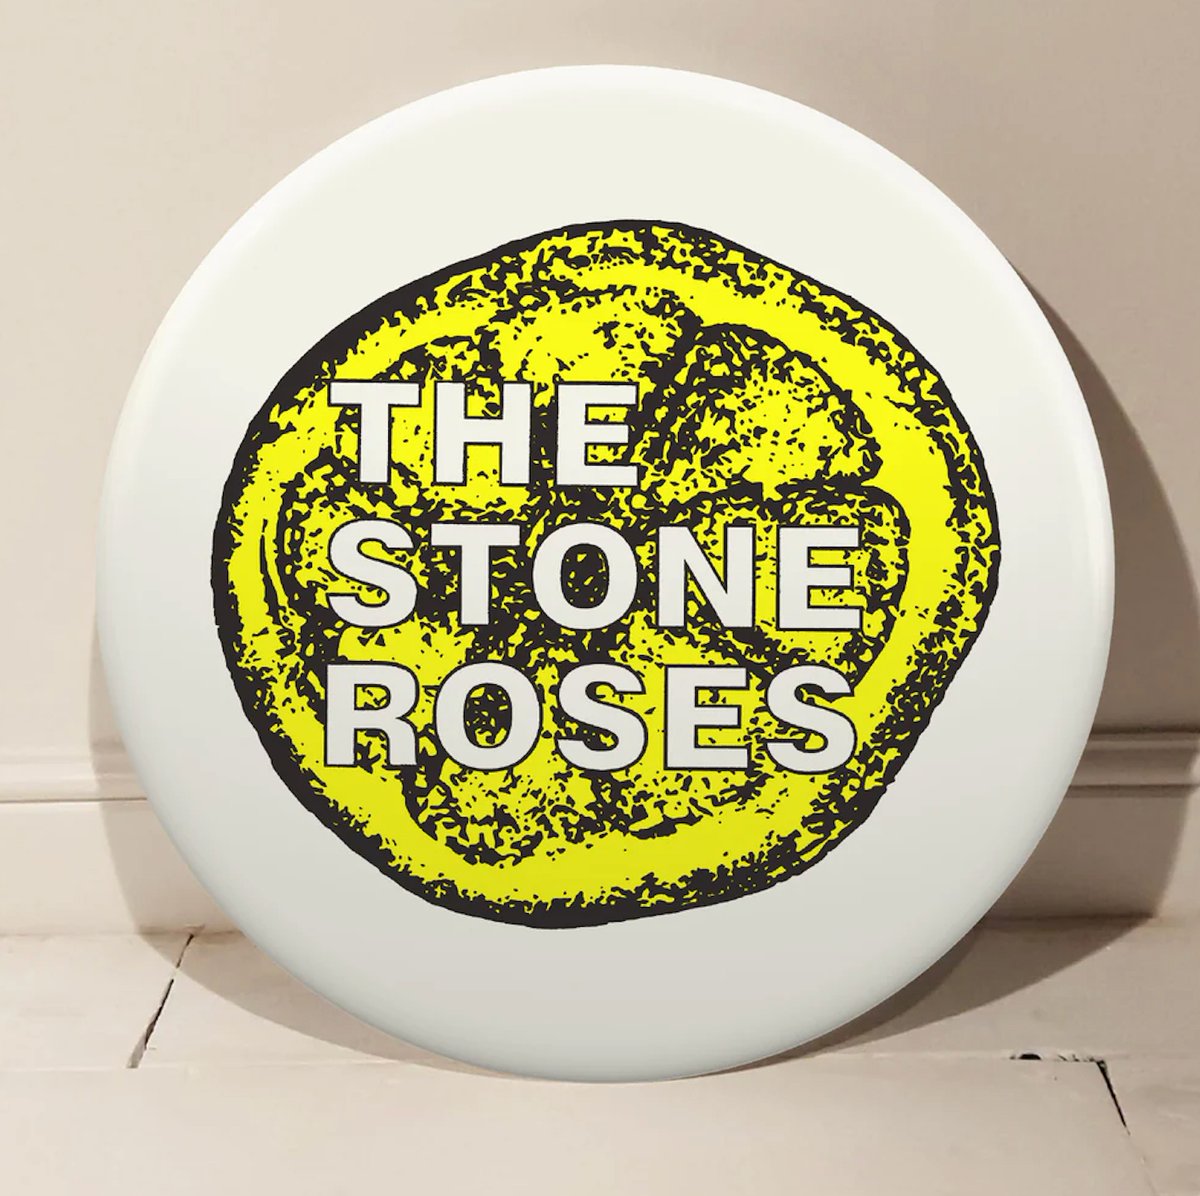 Starting with The Stone Roses 🍋 Some of our favourite Giant Mixed Media Pin Badges by Tony Dennis AKA TapeDeckArt. Available in both 40cm Diameter & 60cm Diameter. DM us for details on price and availability 🫶🏼 #boxgalleries #tapedeck #thestoneroses #rockandroll